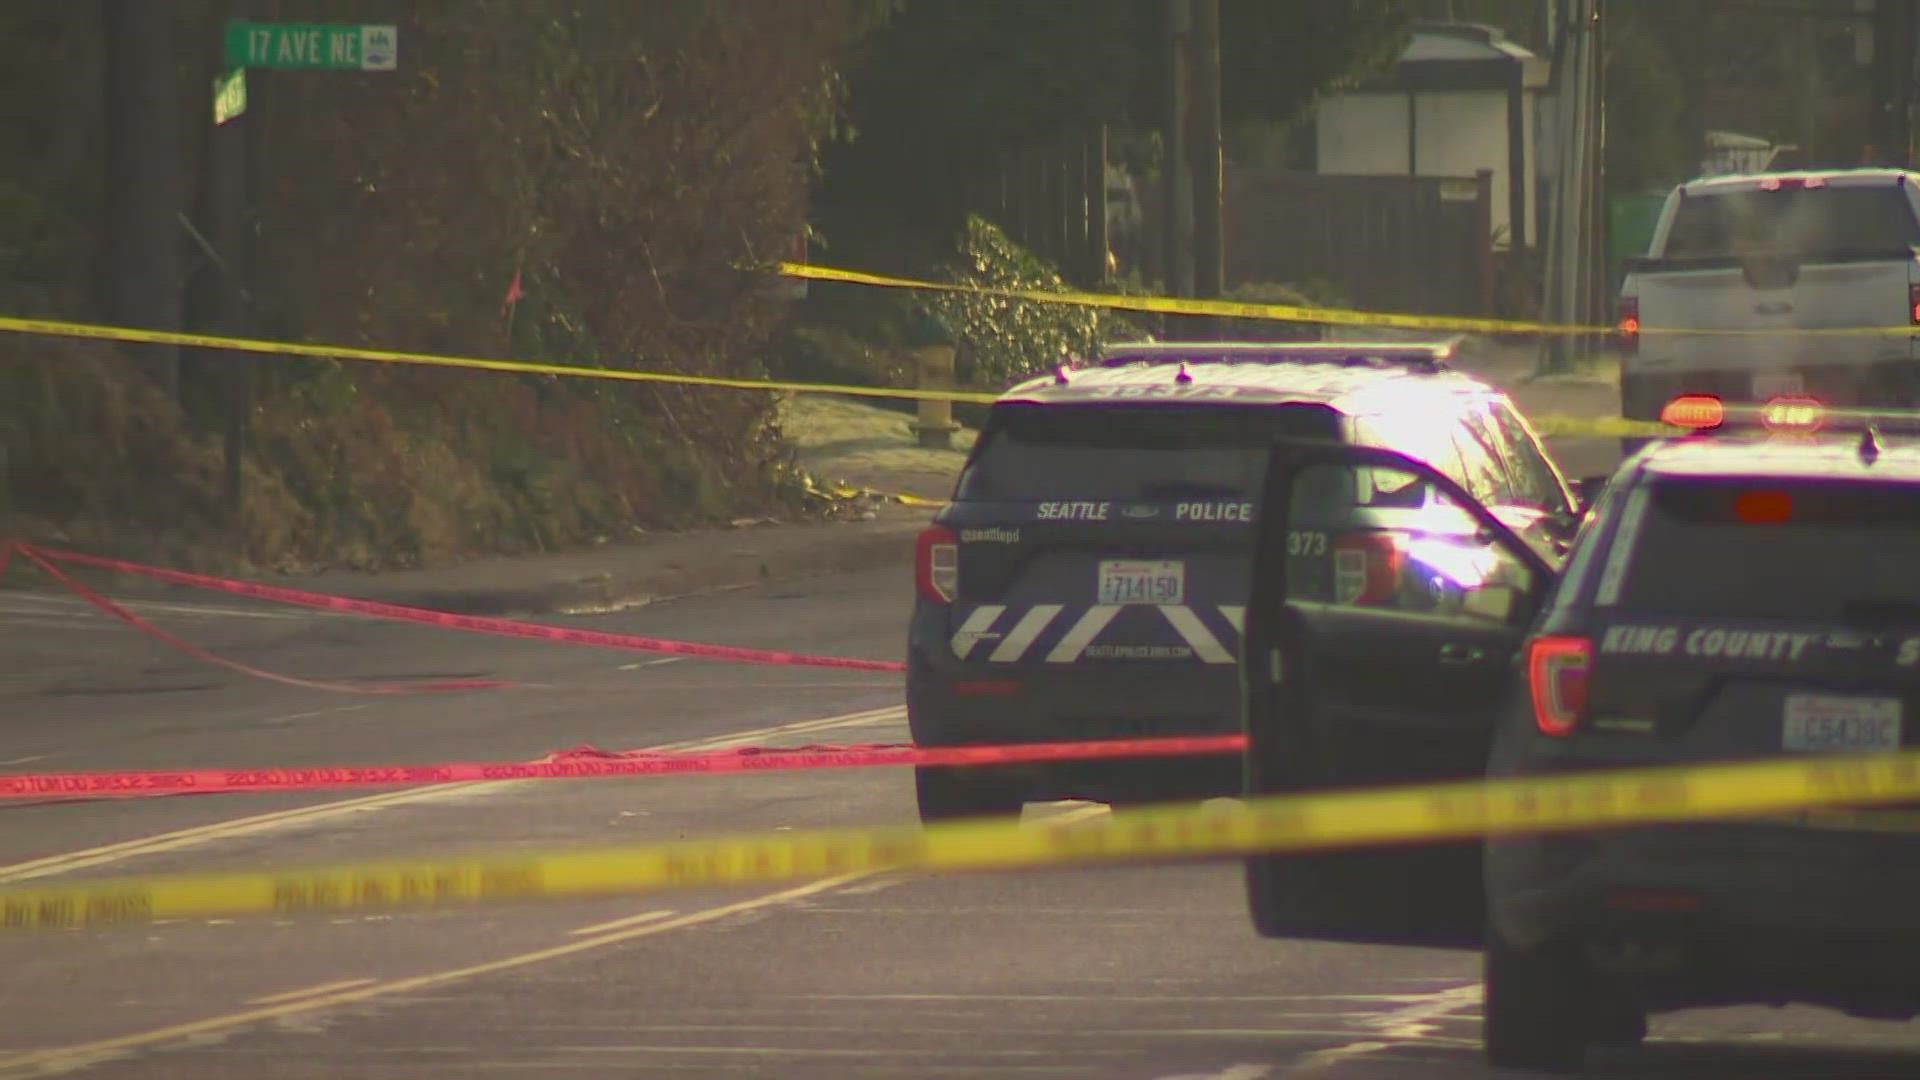 A King County Sheriff's deputy investigating a suspicious vehicle in Shoreline exchanged gunfire with a suspect early Sunday morning, according to Bellevue police.